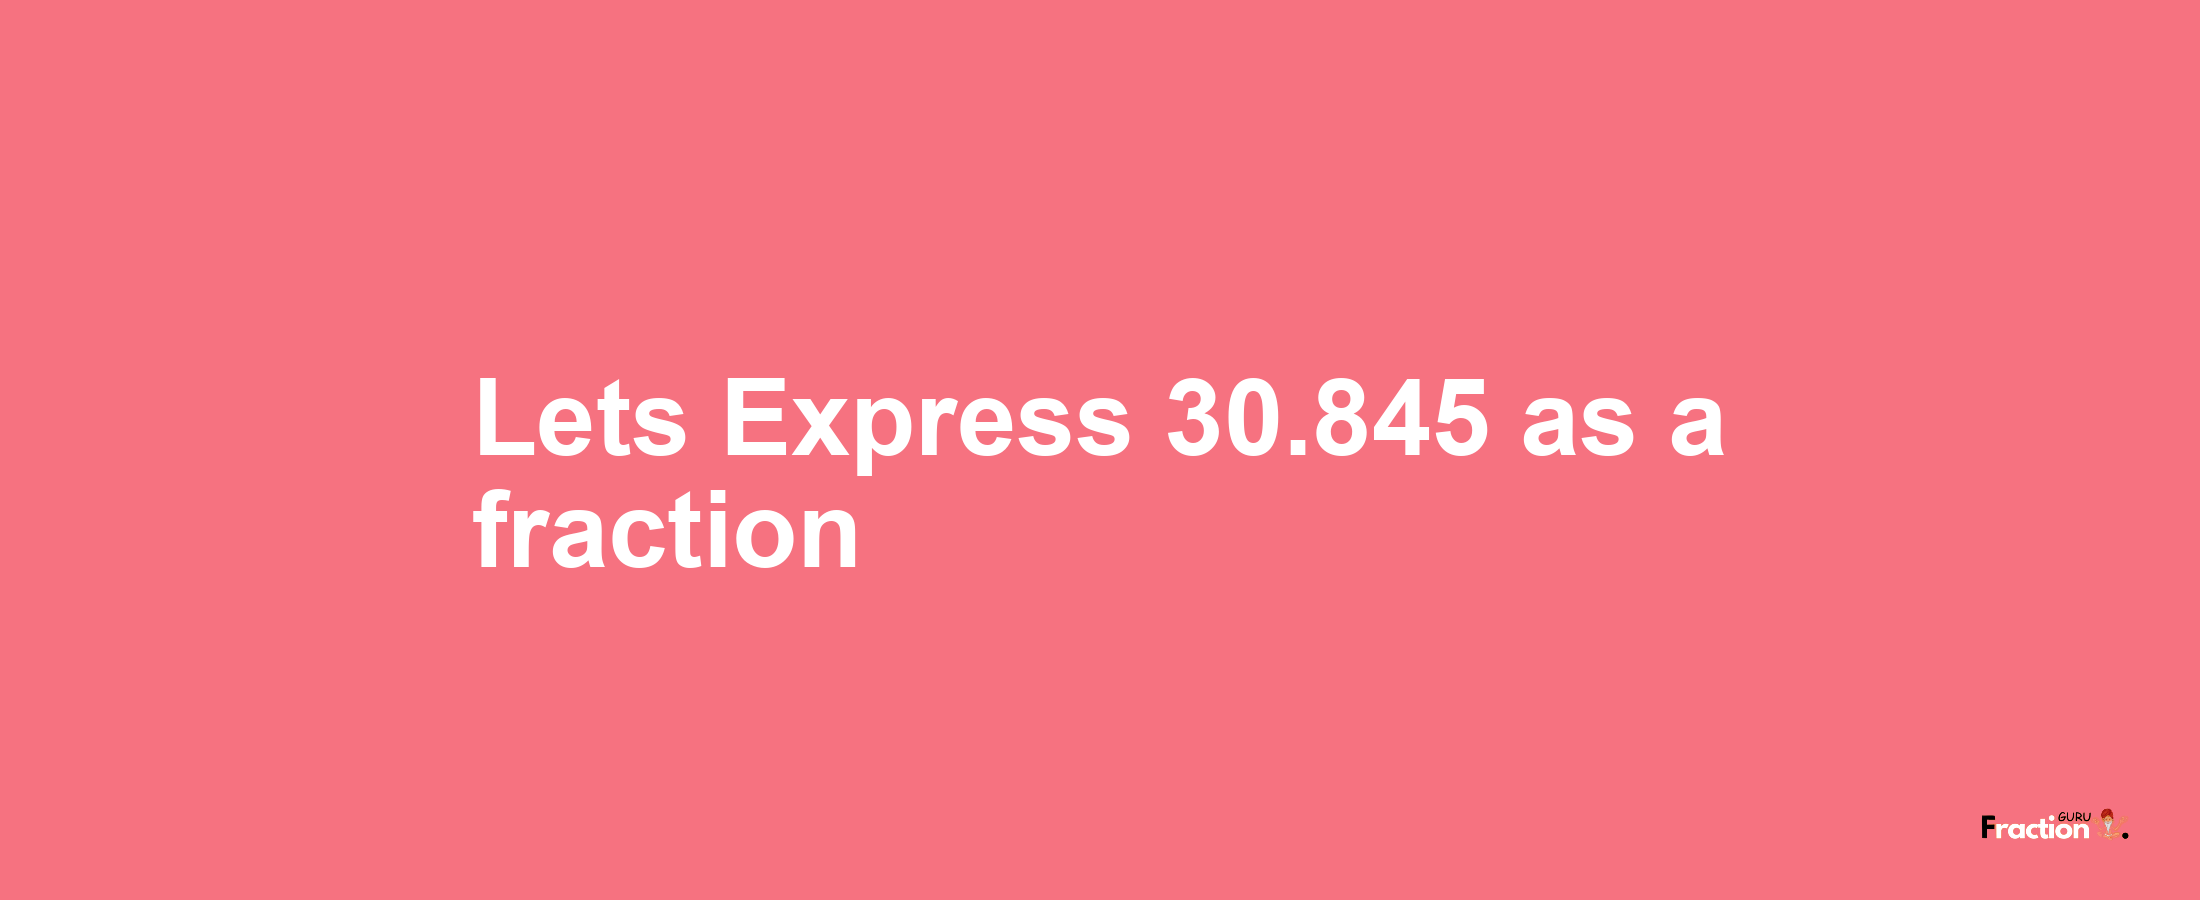 Lets Express 30.845 as afraction